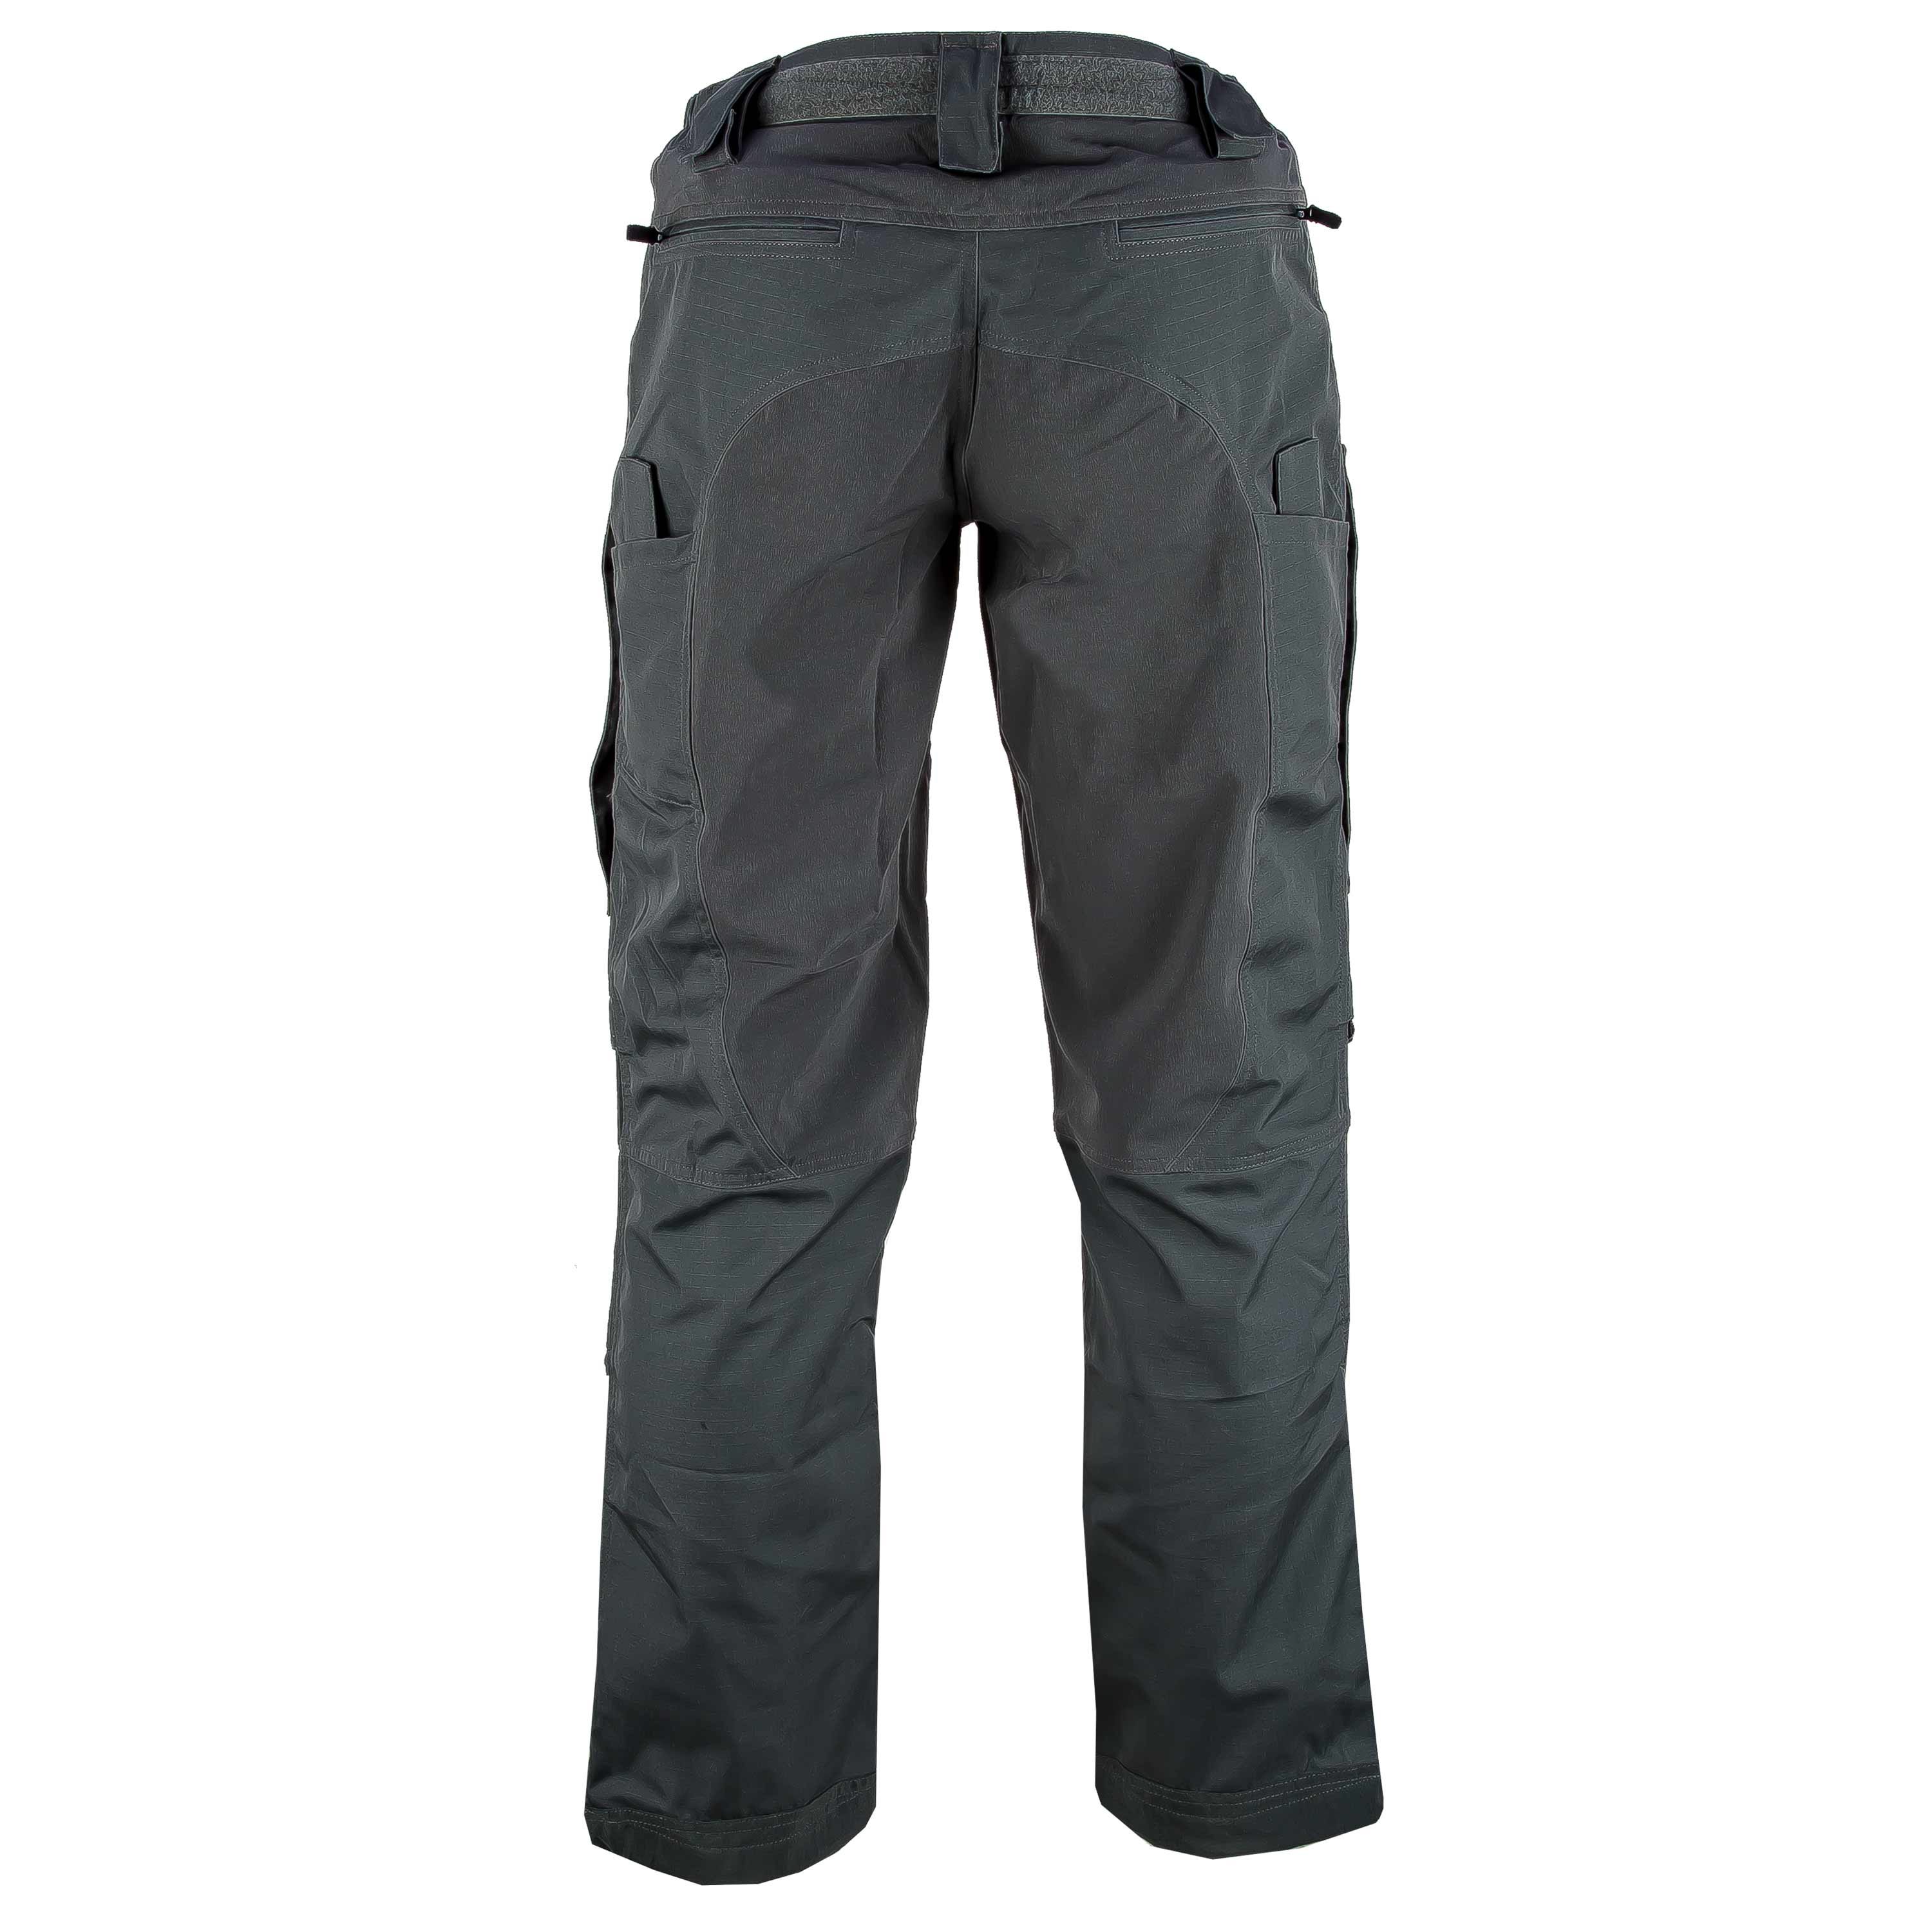 Purchase the UF Pro P-40 Tac-2 Pants steel gray by ASMC